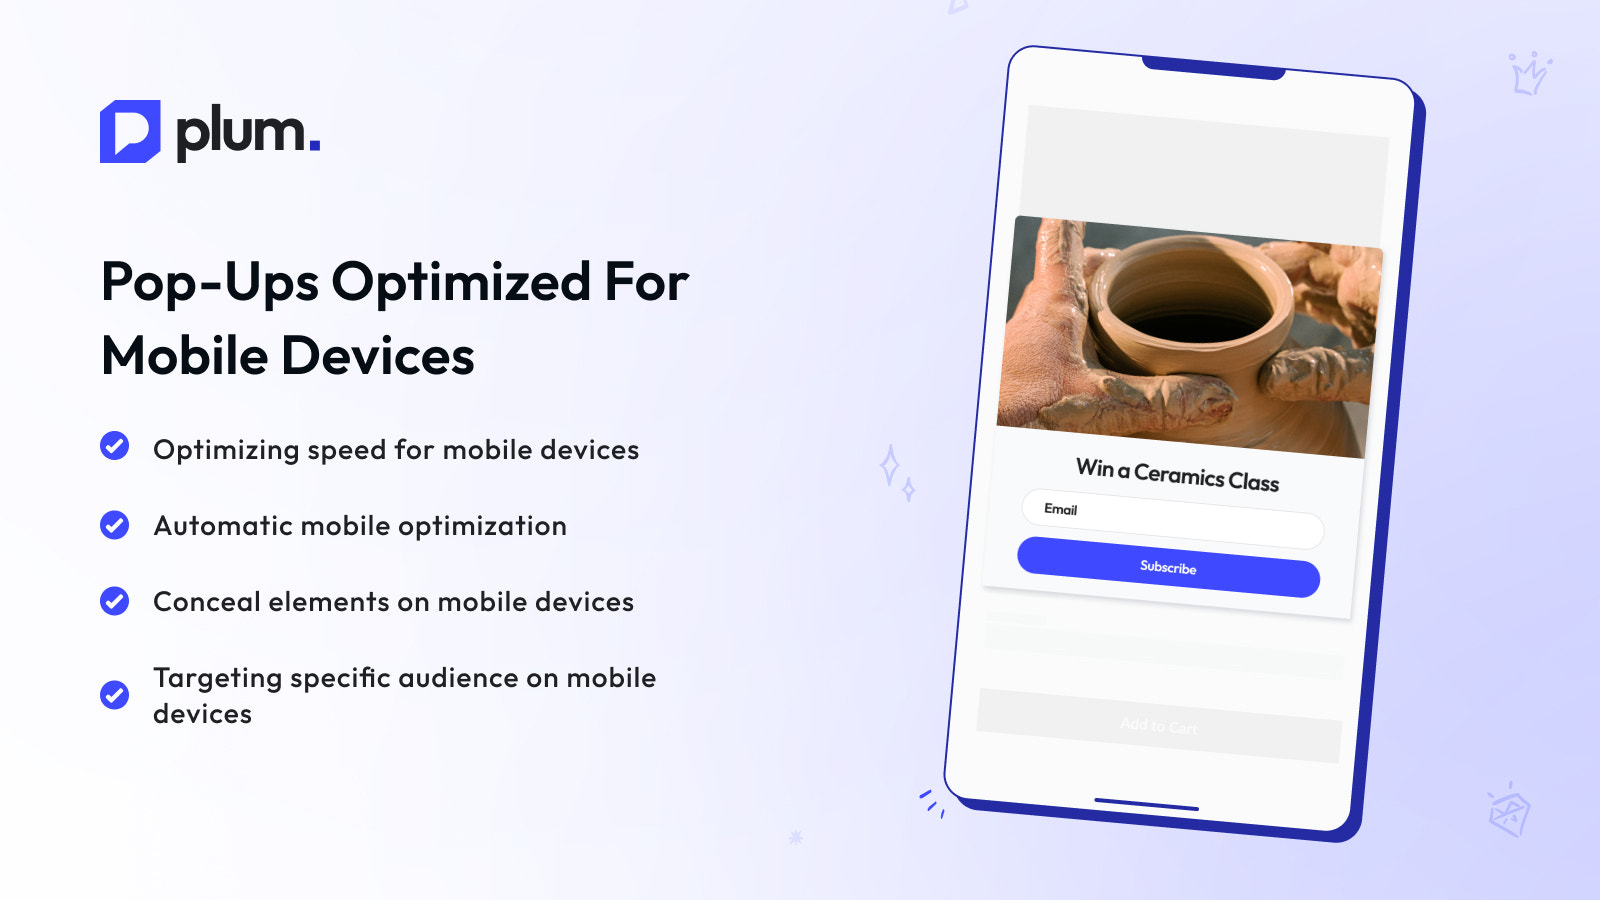 Pop-ups optimized for mobile devices